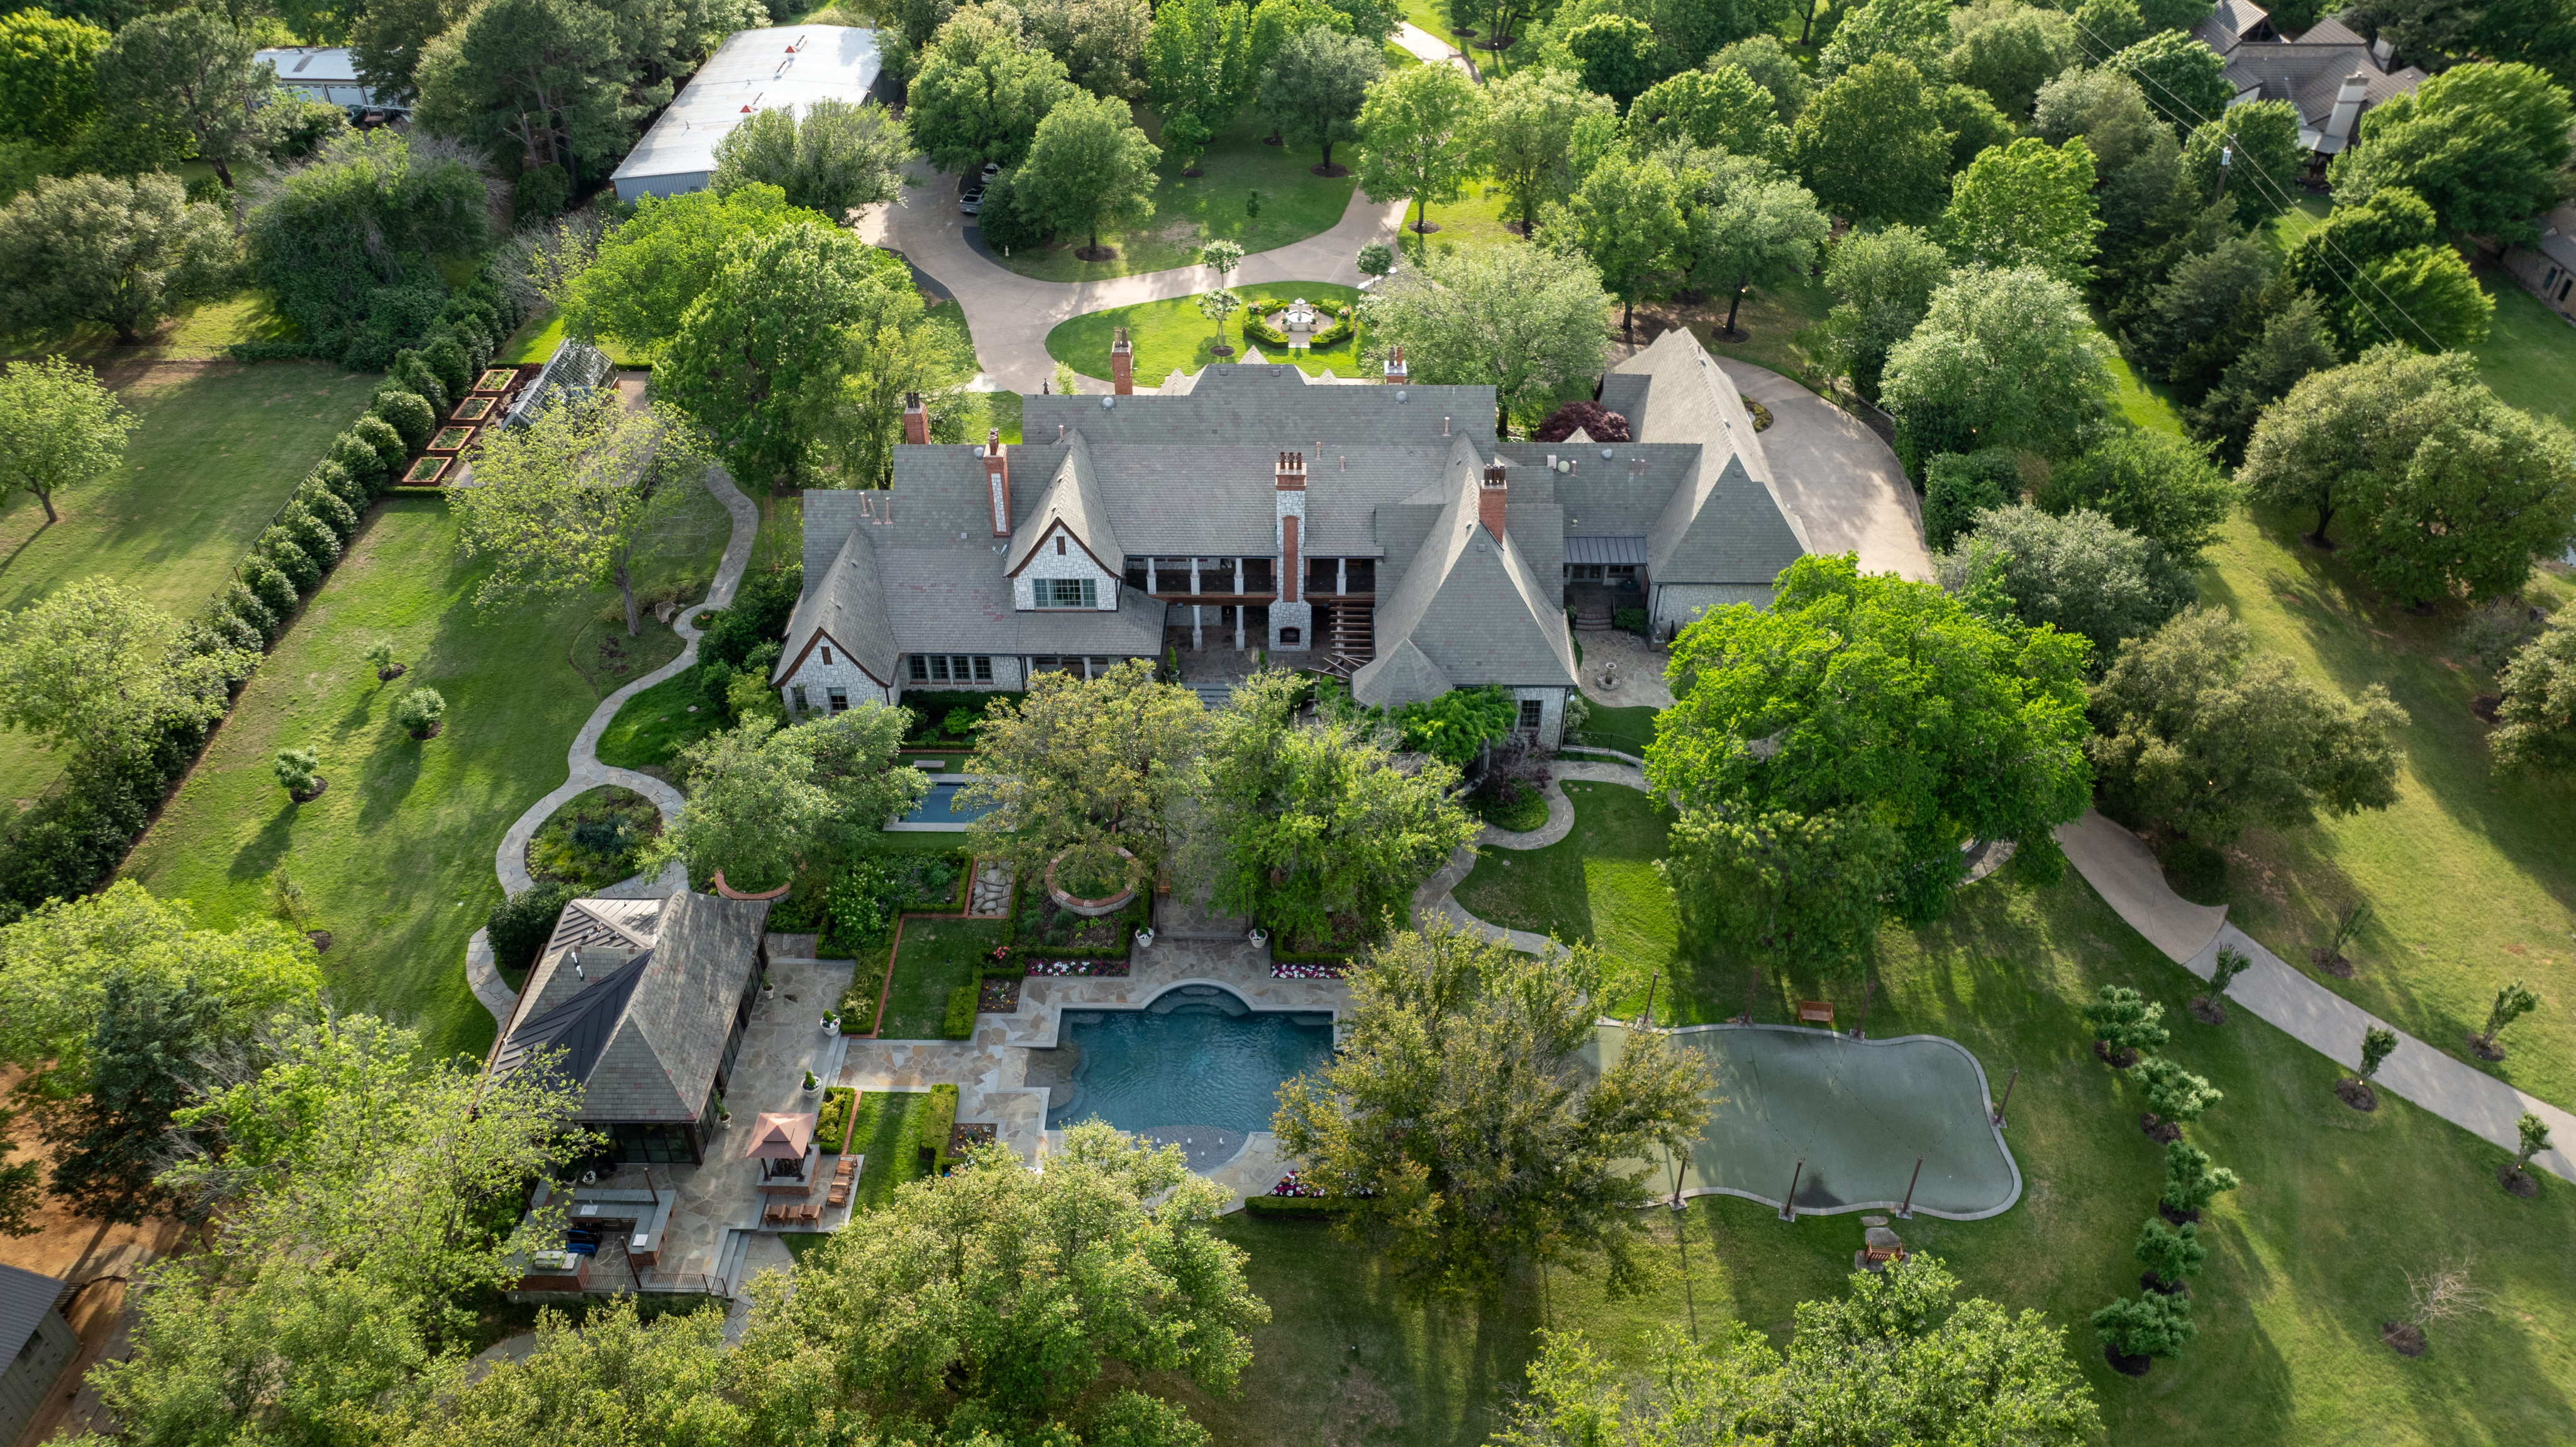 An English manor-style estate in Colleyville hit the market for $8.75 million.
The home at...